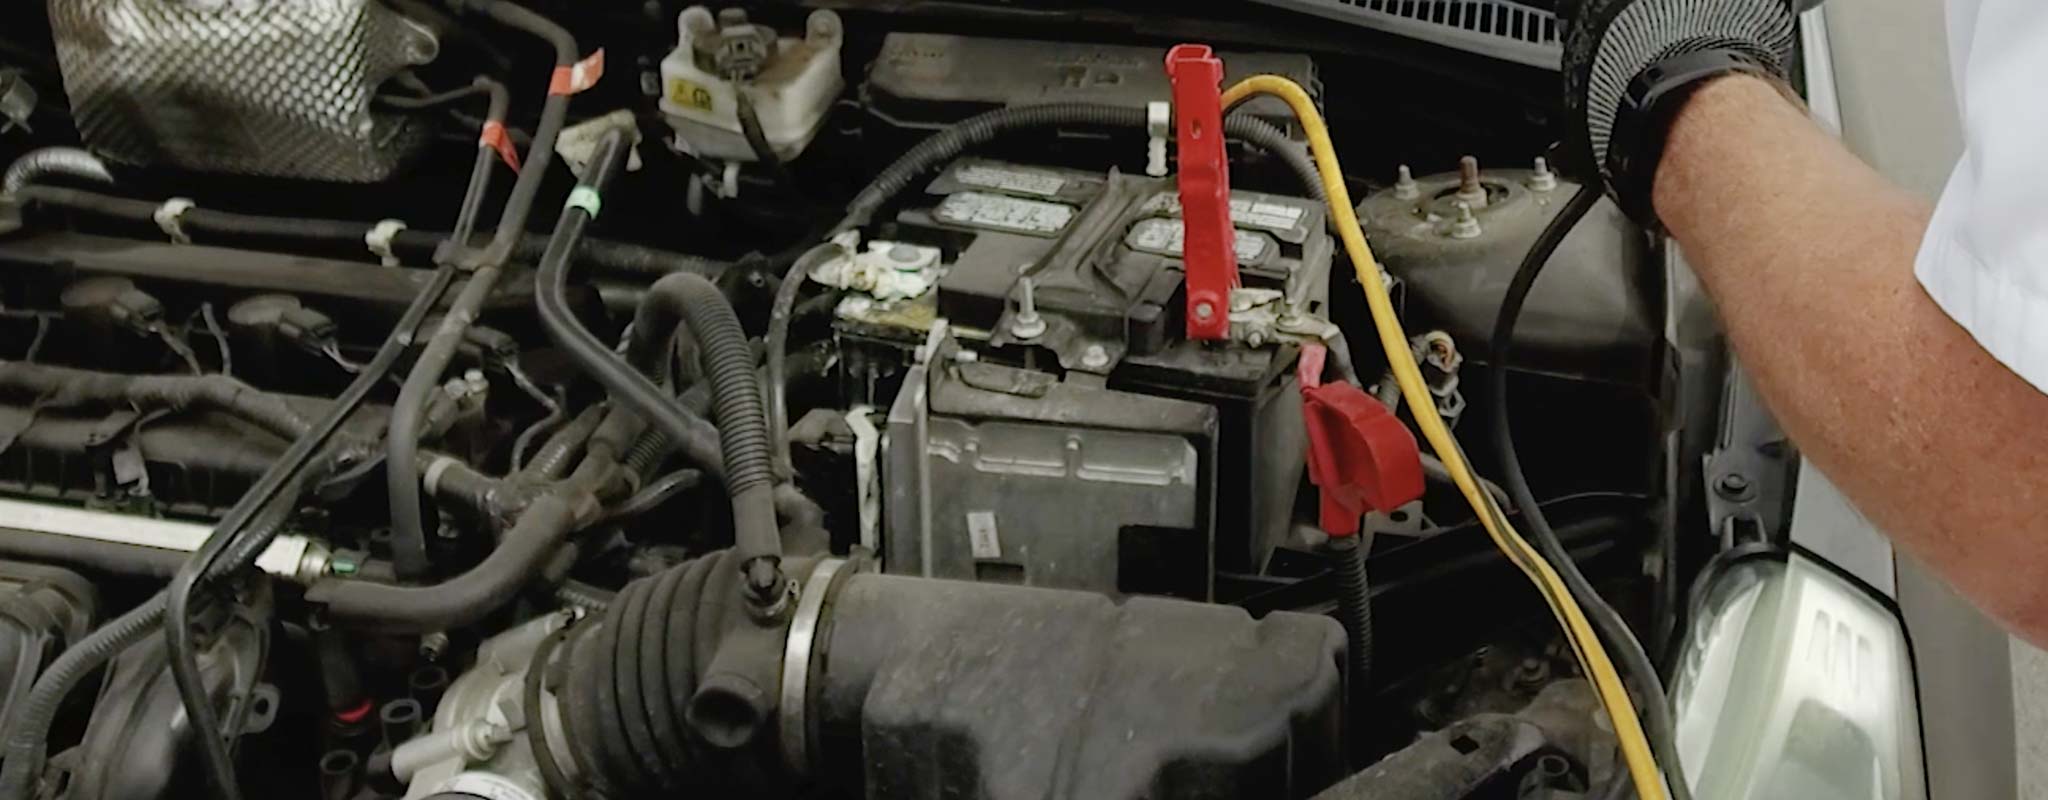 Jumper cables on a dead battery.